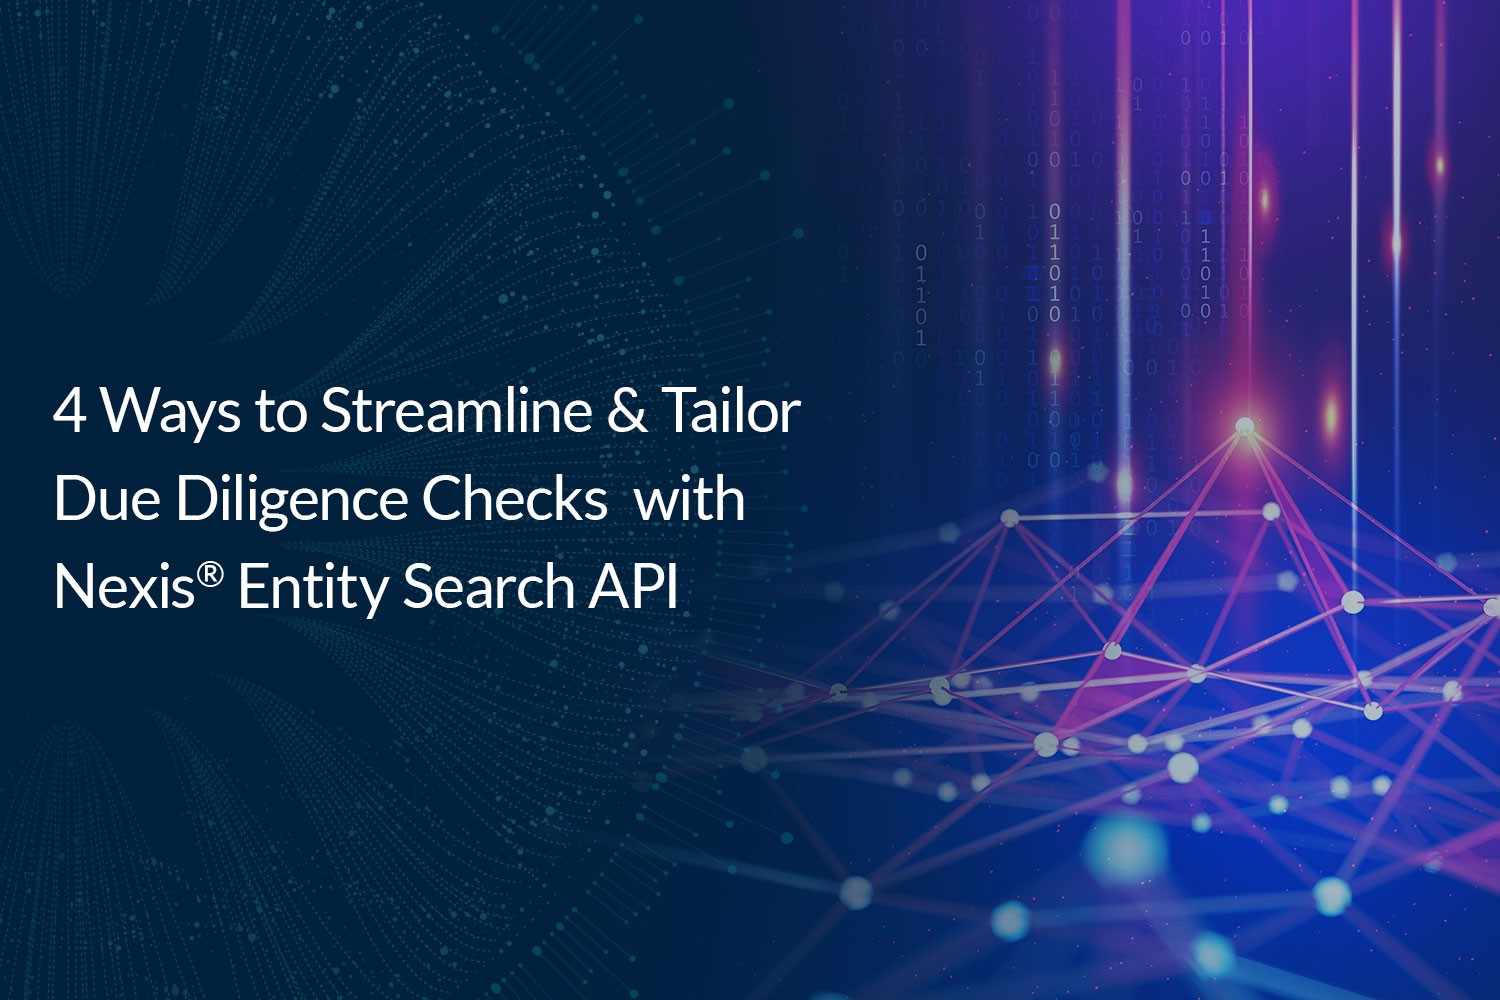 4 Ways to Streamline & Tailor Due Diligence Checks to Your Organization's Specific Concerns